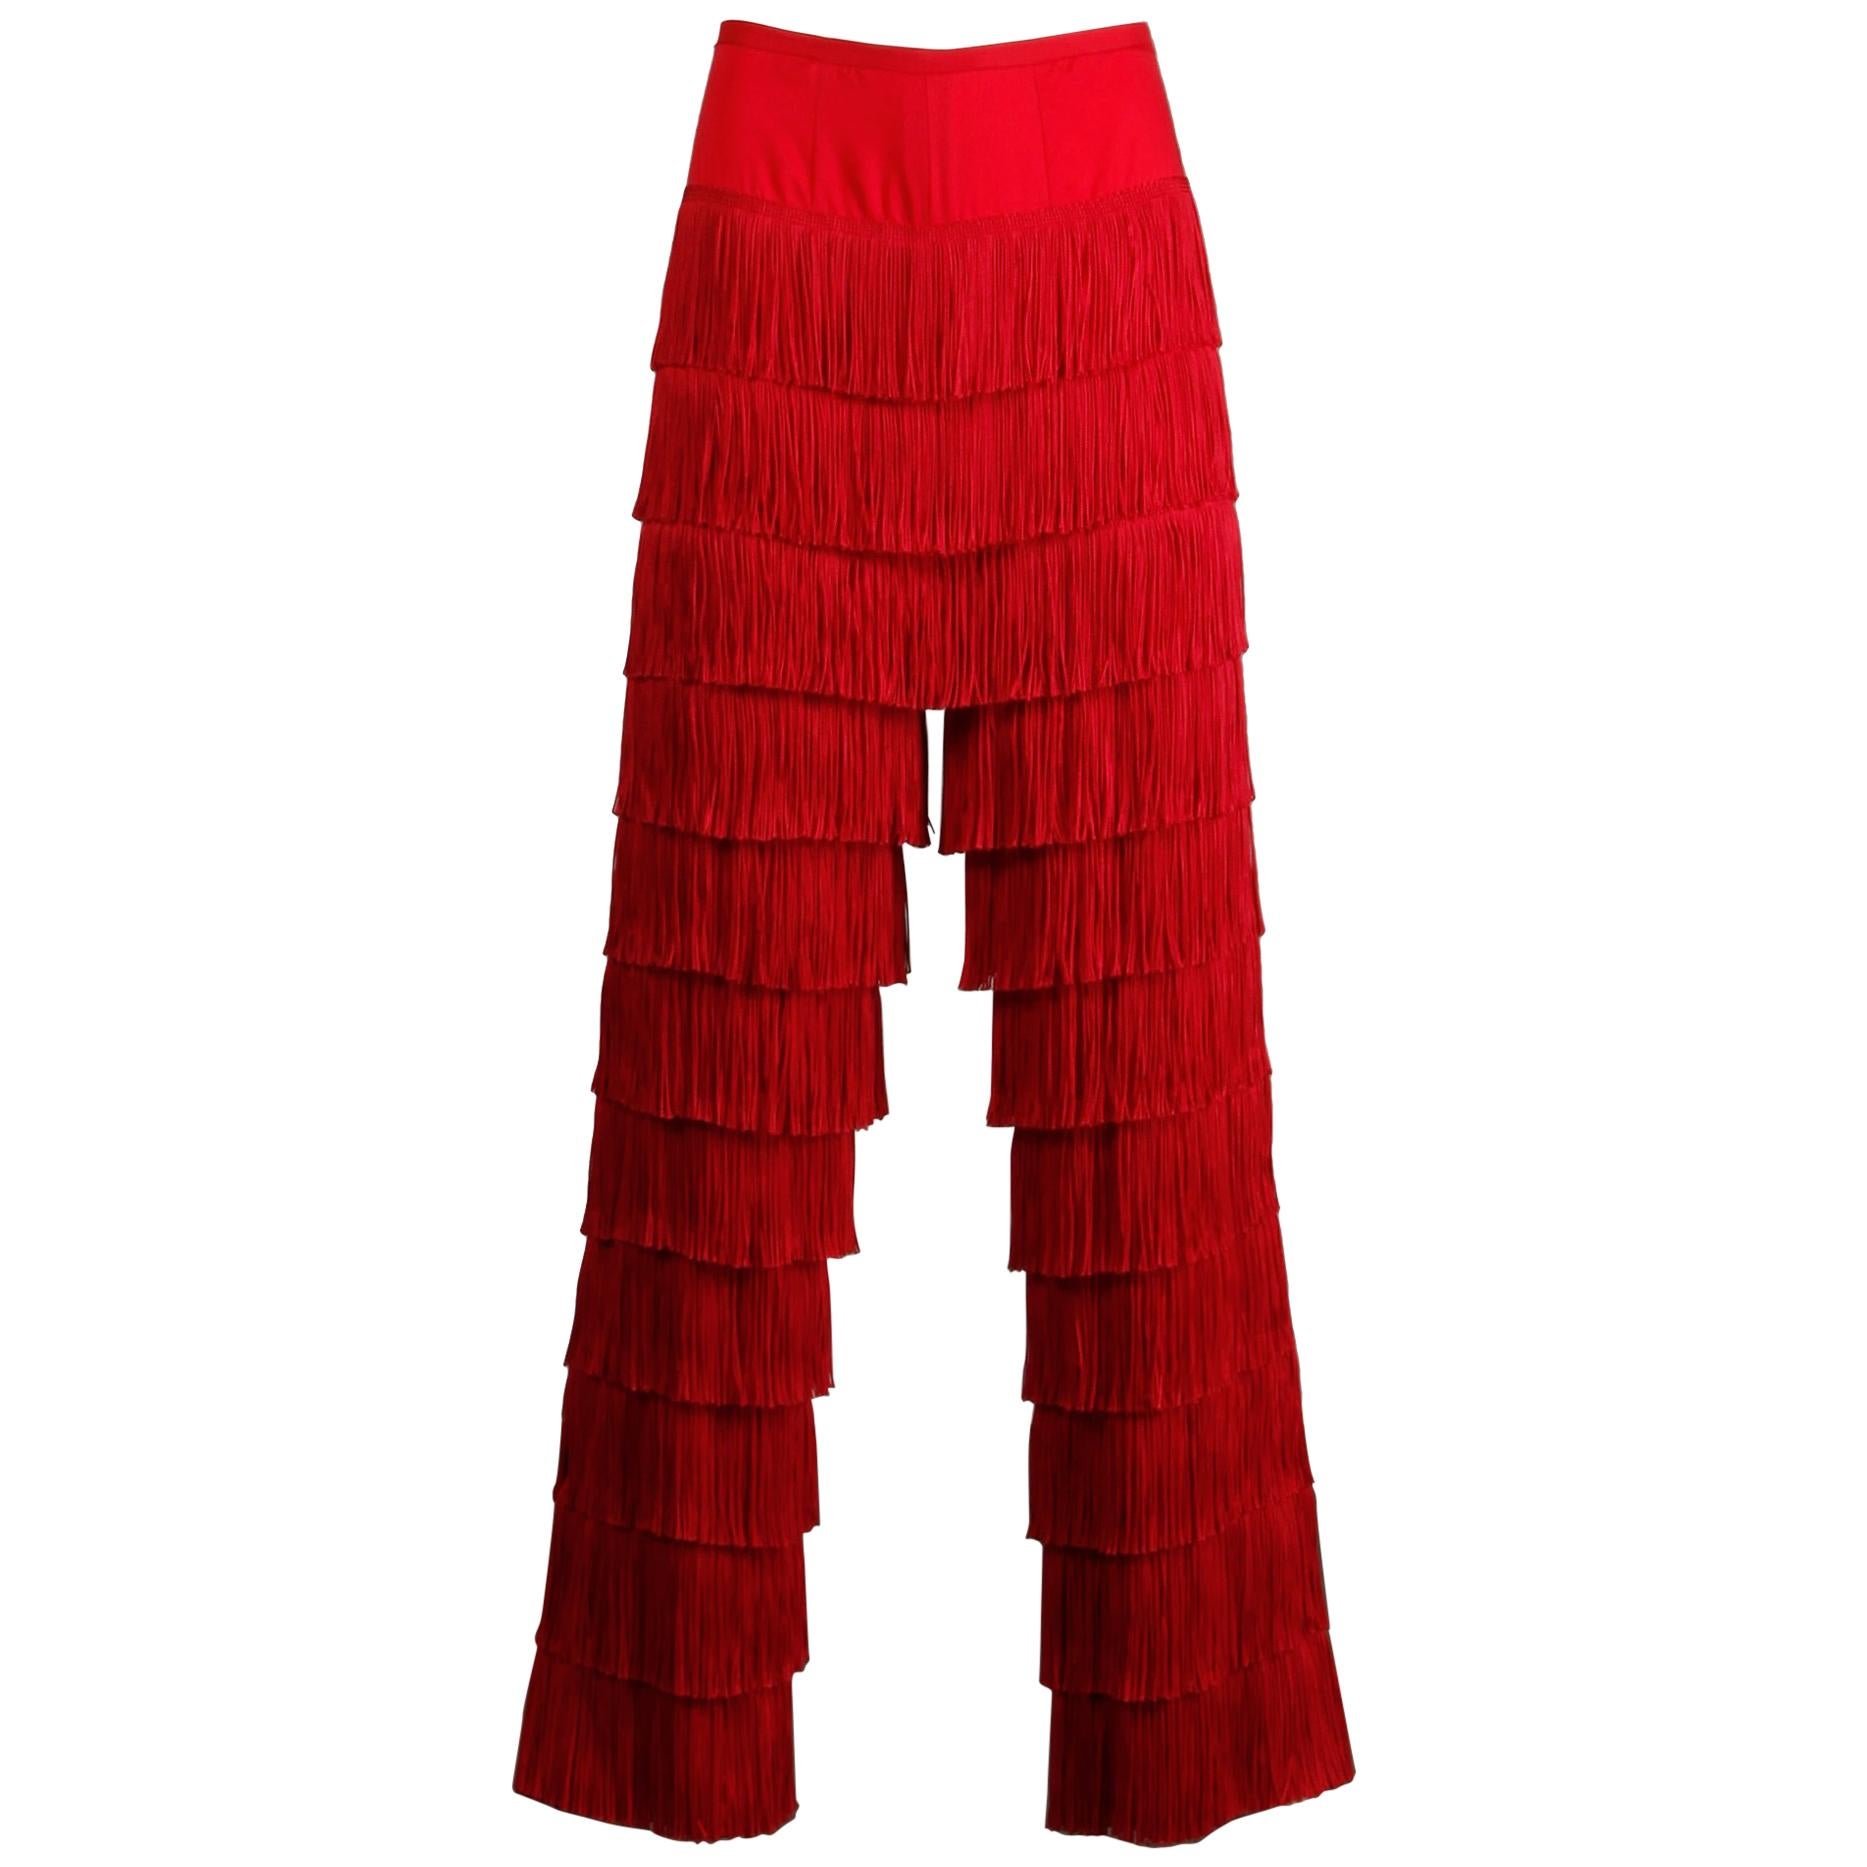 Epic 1960s Vintage Bright Red Tiered Fringe Pants or Trousers